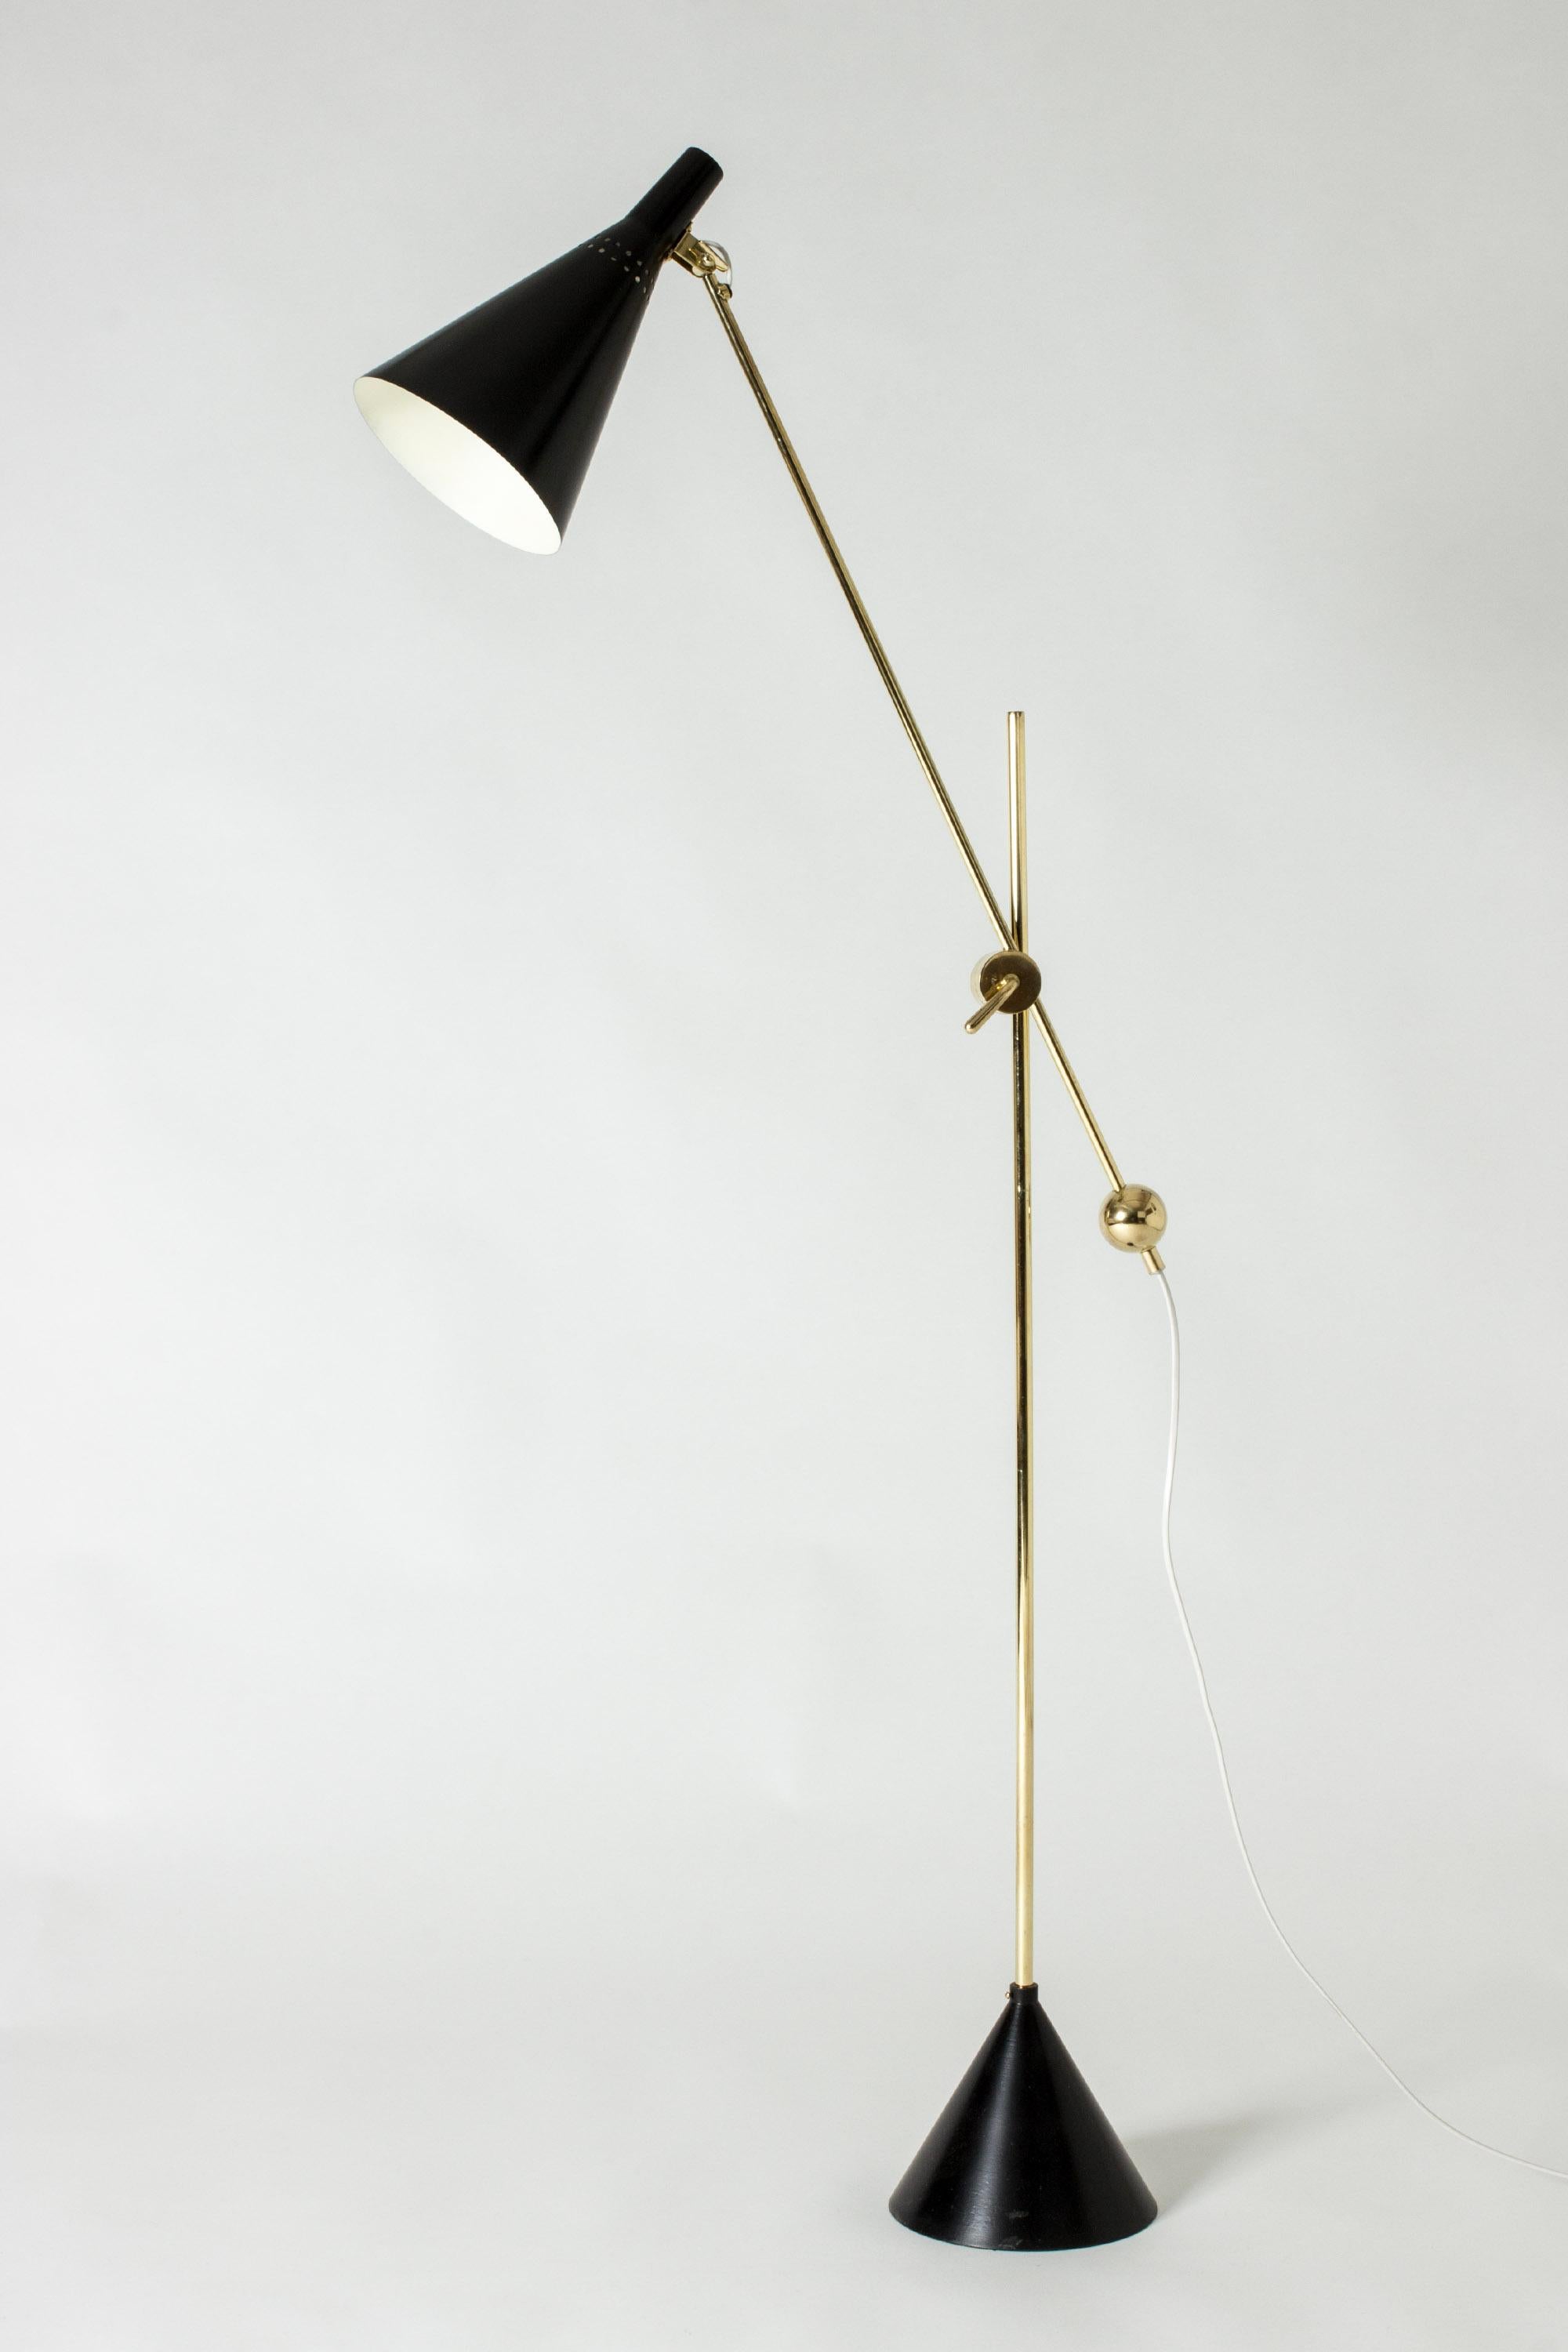 Amazing floor lamp by Tapio Wirkkala, made from brass and black lacquered metal. Beautiful decorative brass details and clever mechanism for shifting the height and angle of the shade. Conical base.